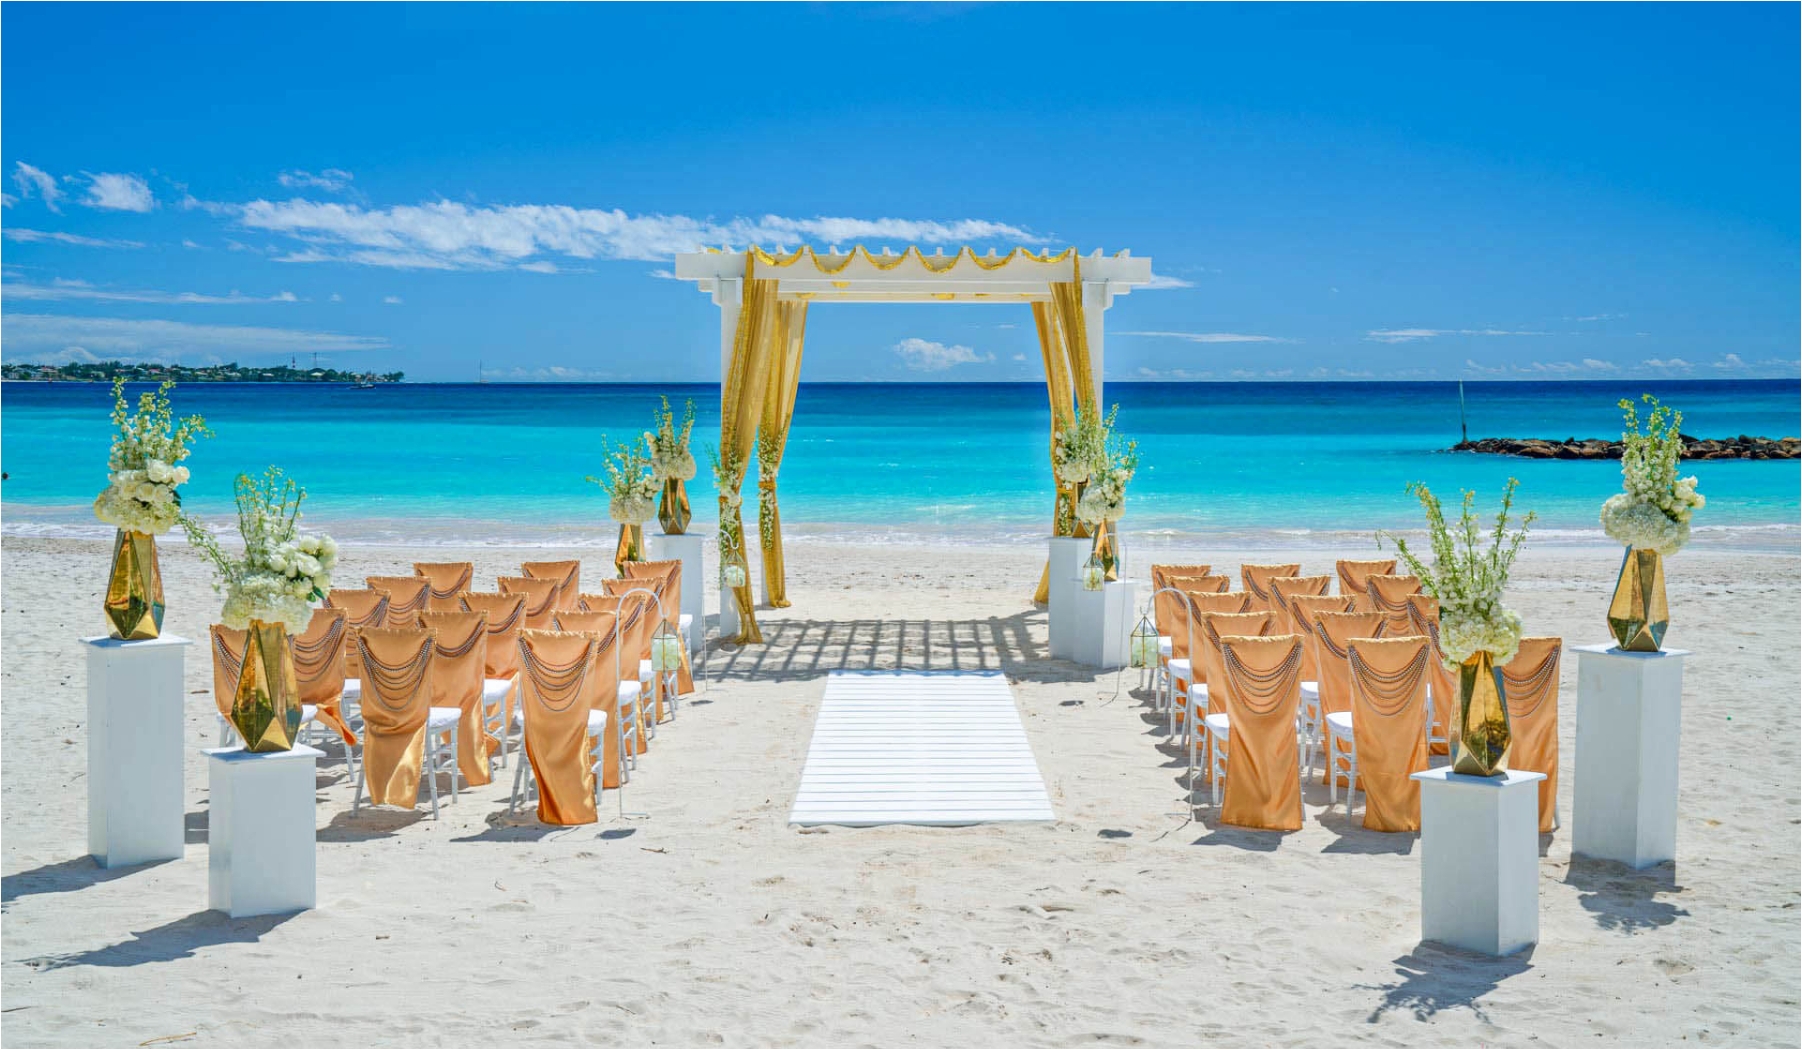 Sandals Wedding Packages - Everything You Need To Know